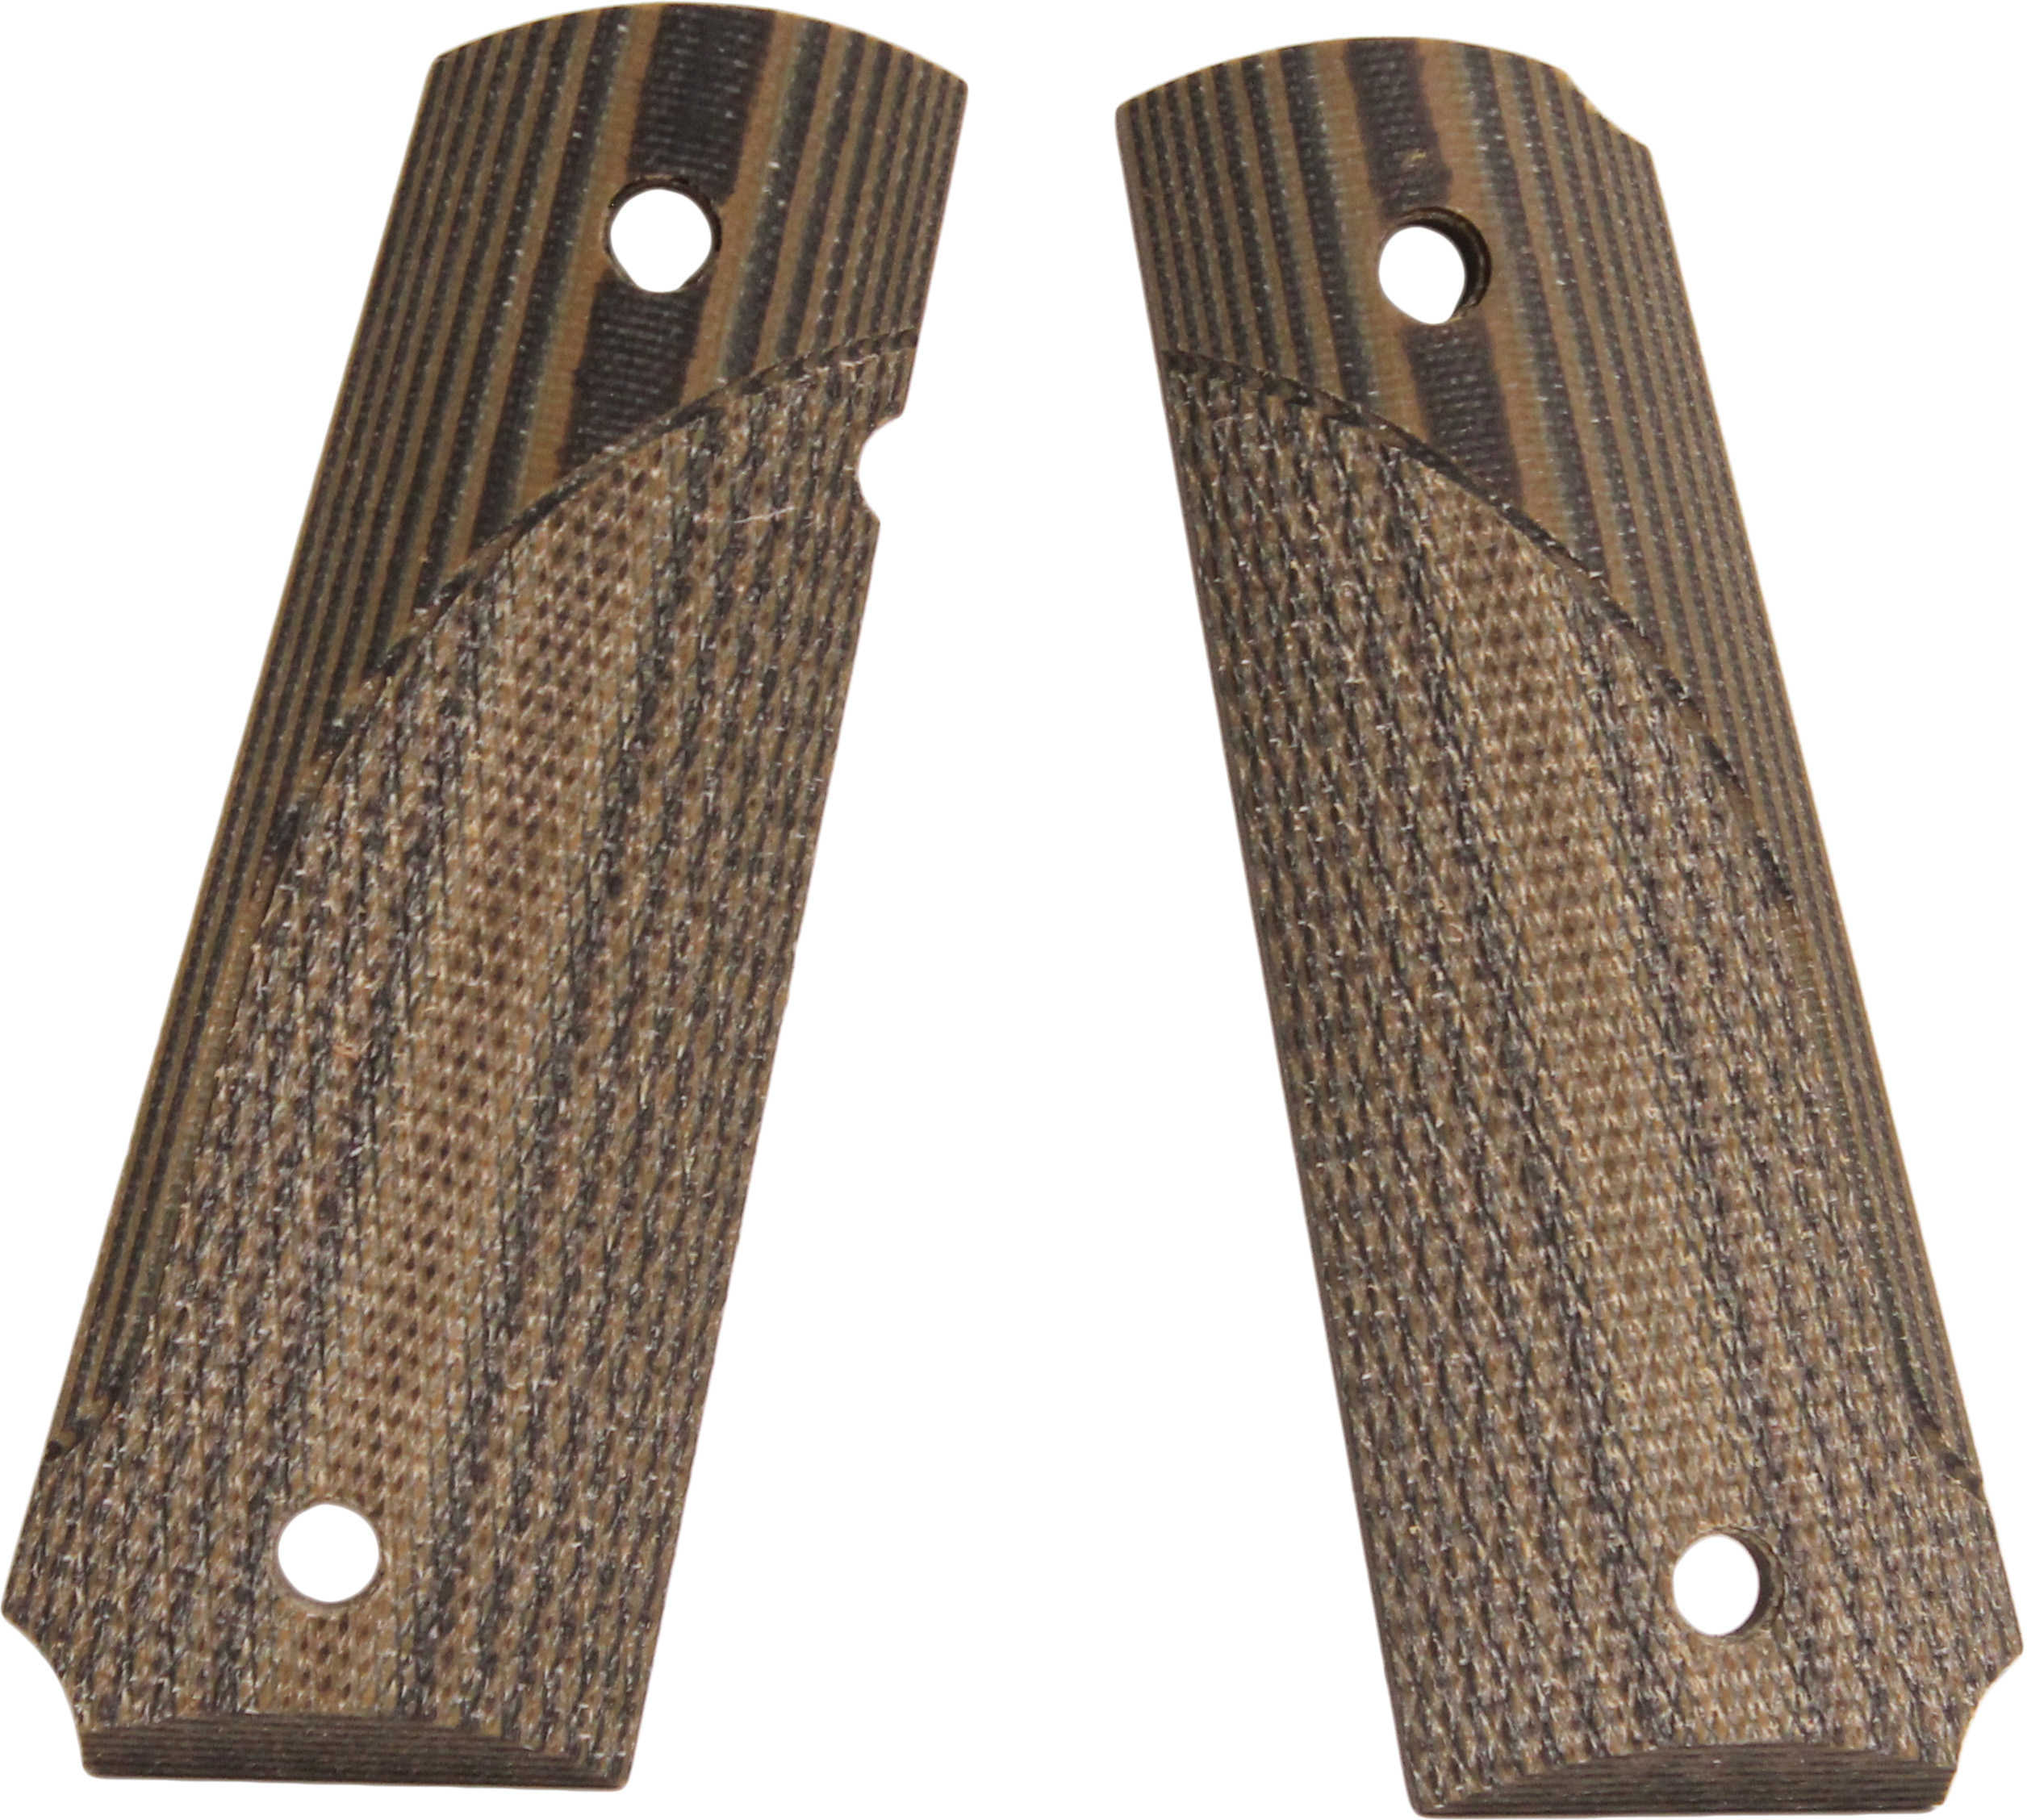 Pachmayr Dominator G10 Grips For 1911 Green/Black Checkered